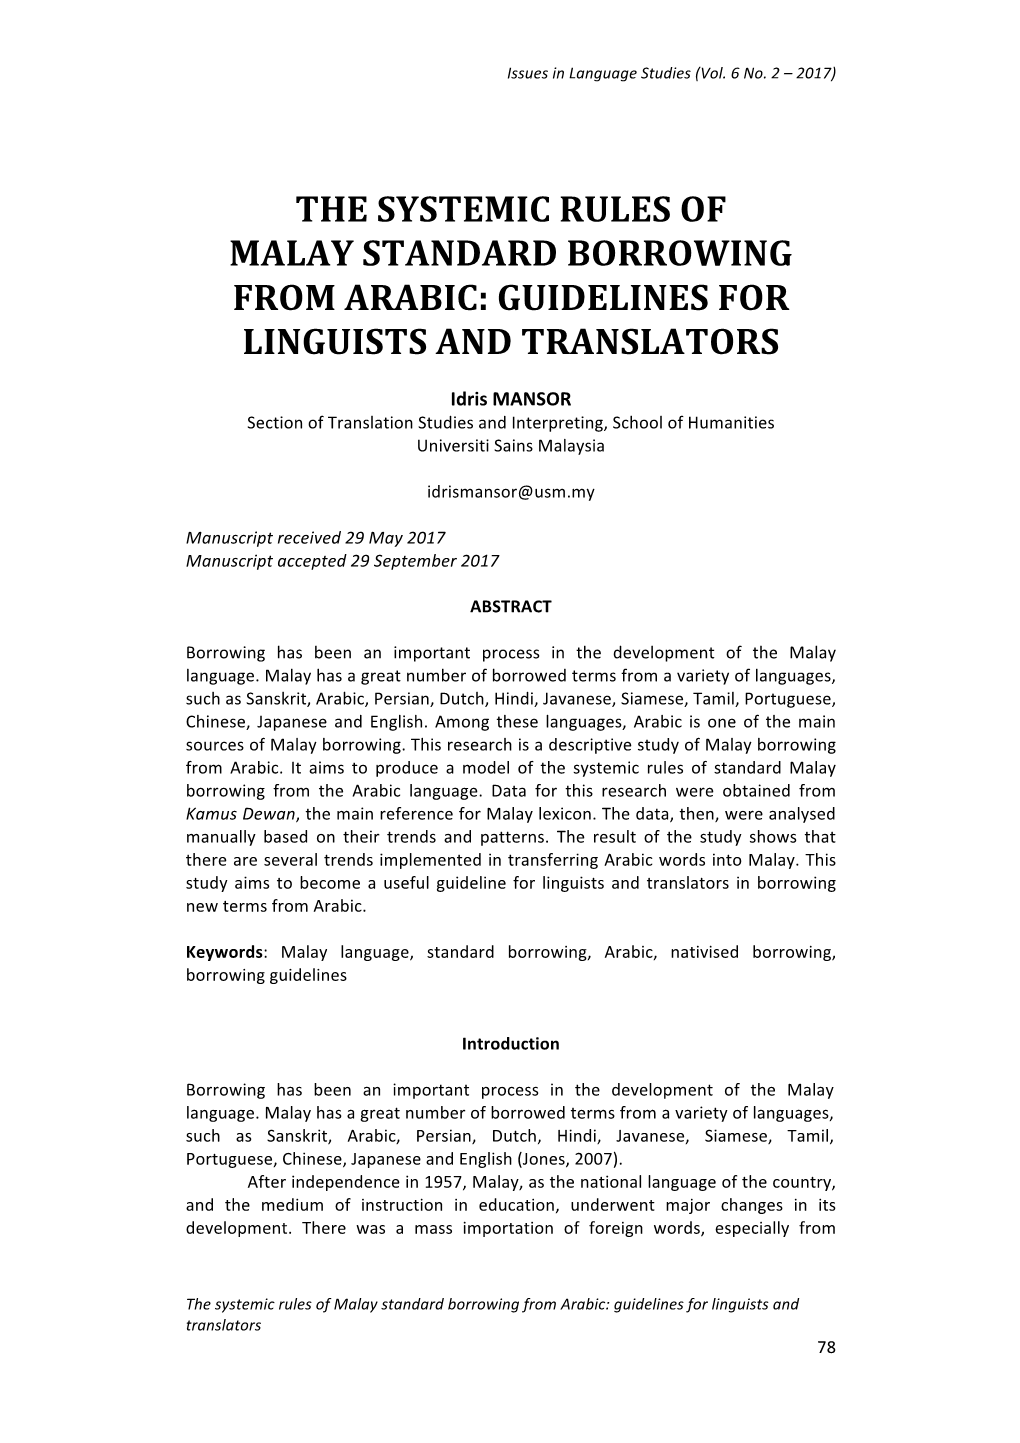 The Systemic Rules of Malay Standard Borrowing from Arabic: Guidelines for Linguists and Translators